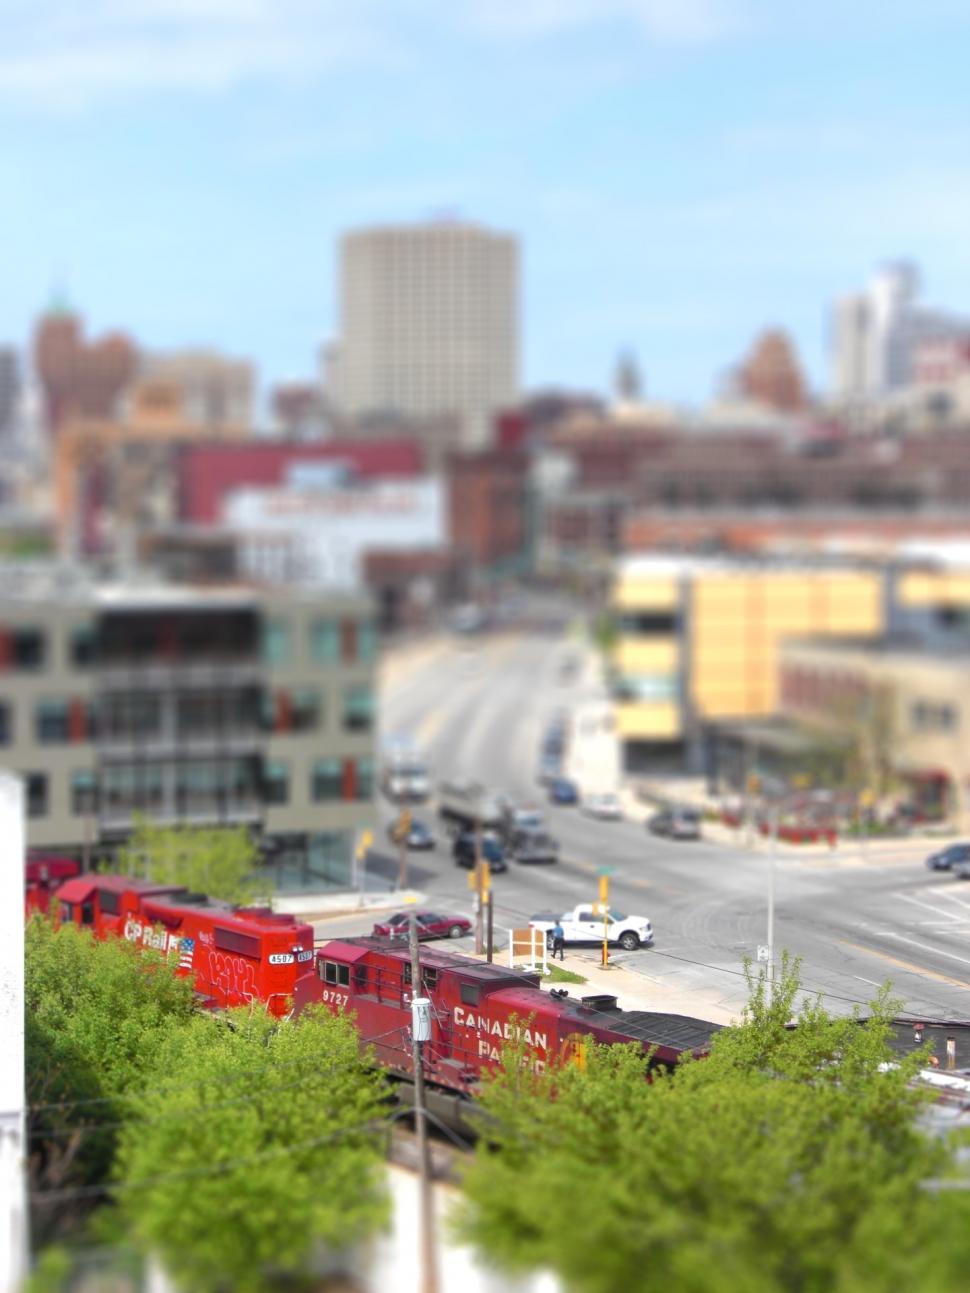 Free Image of Red Train Traveling Through City Near Tall Buildings 